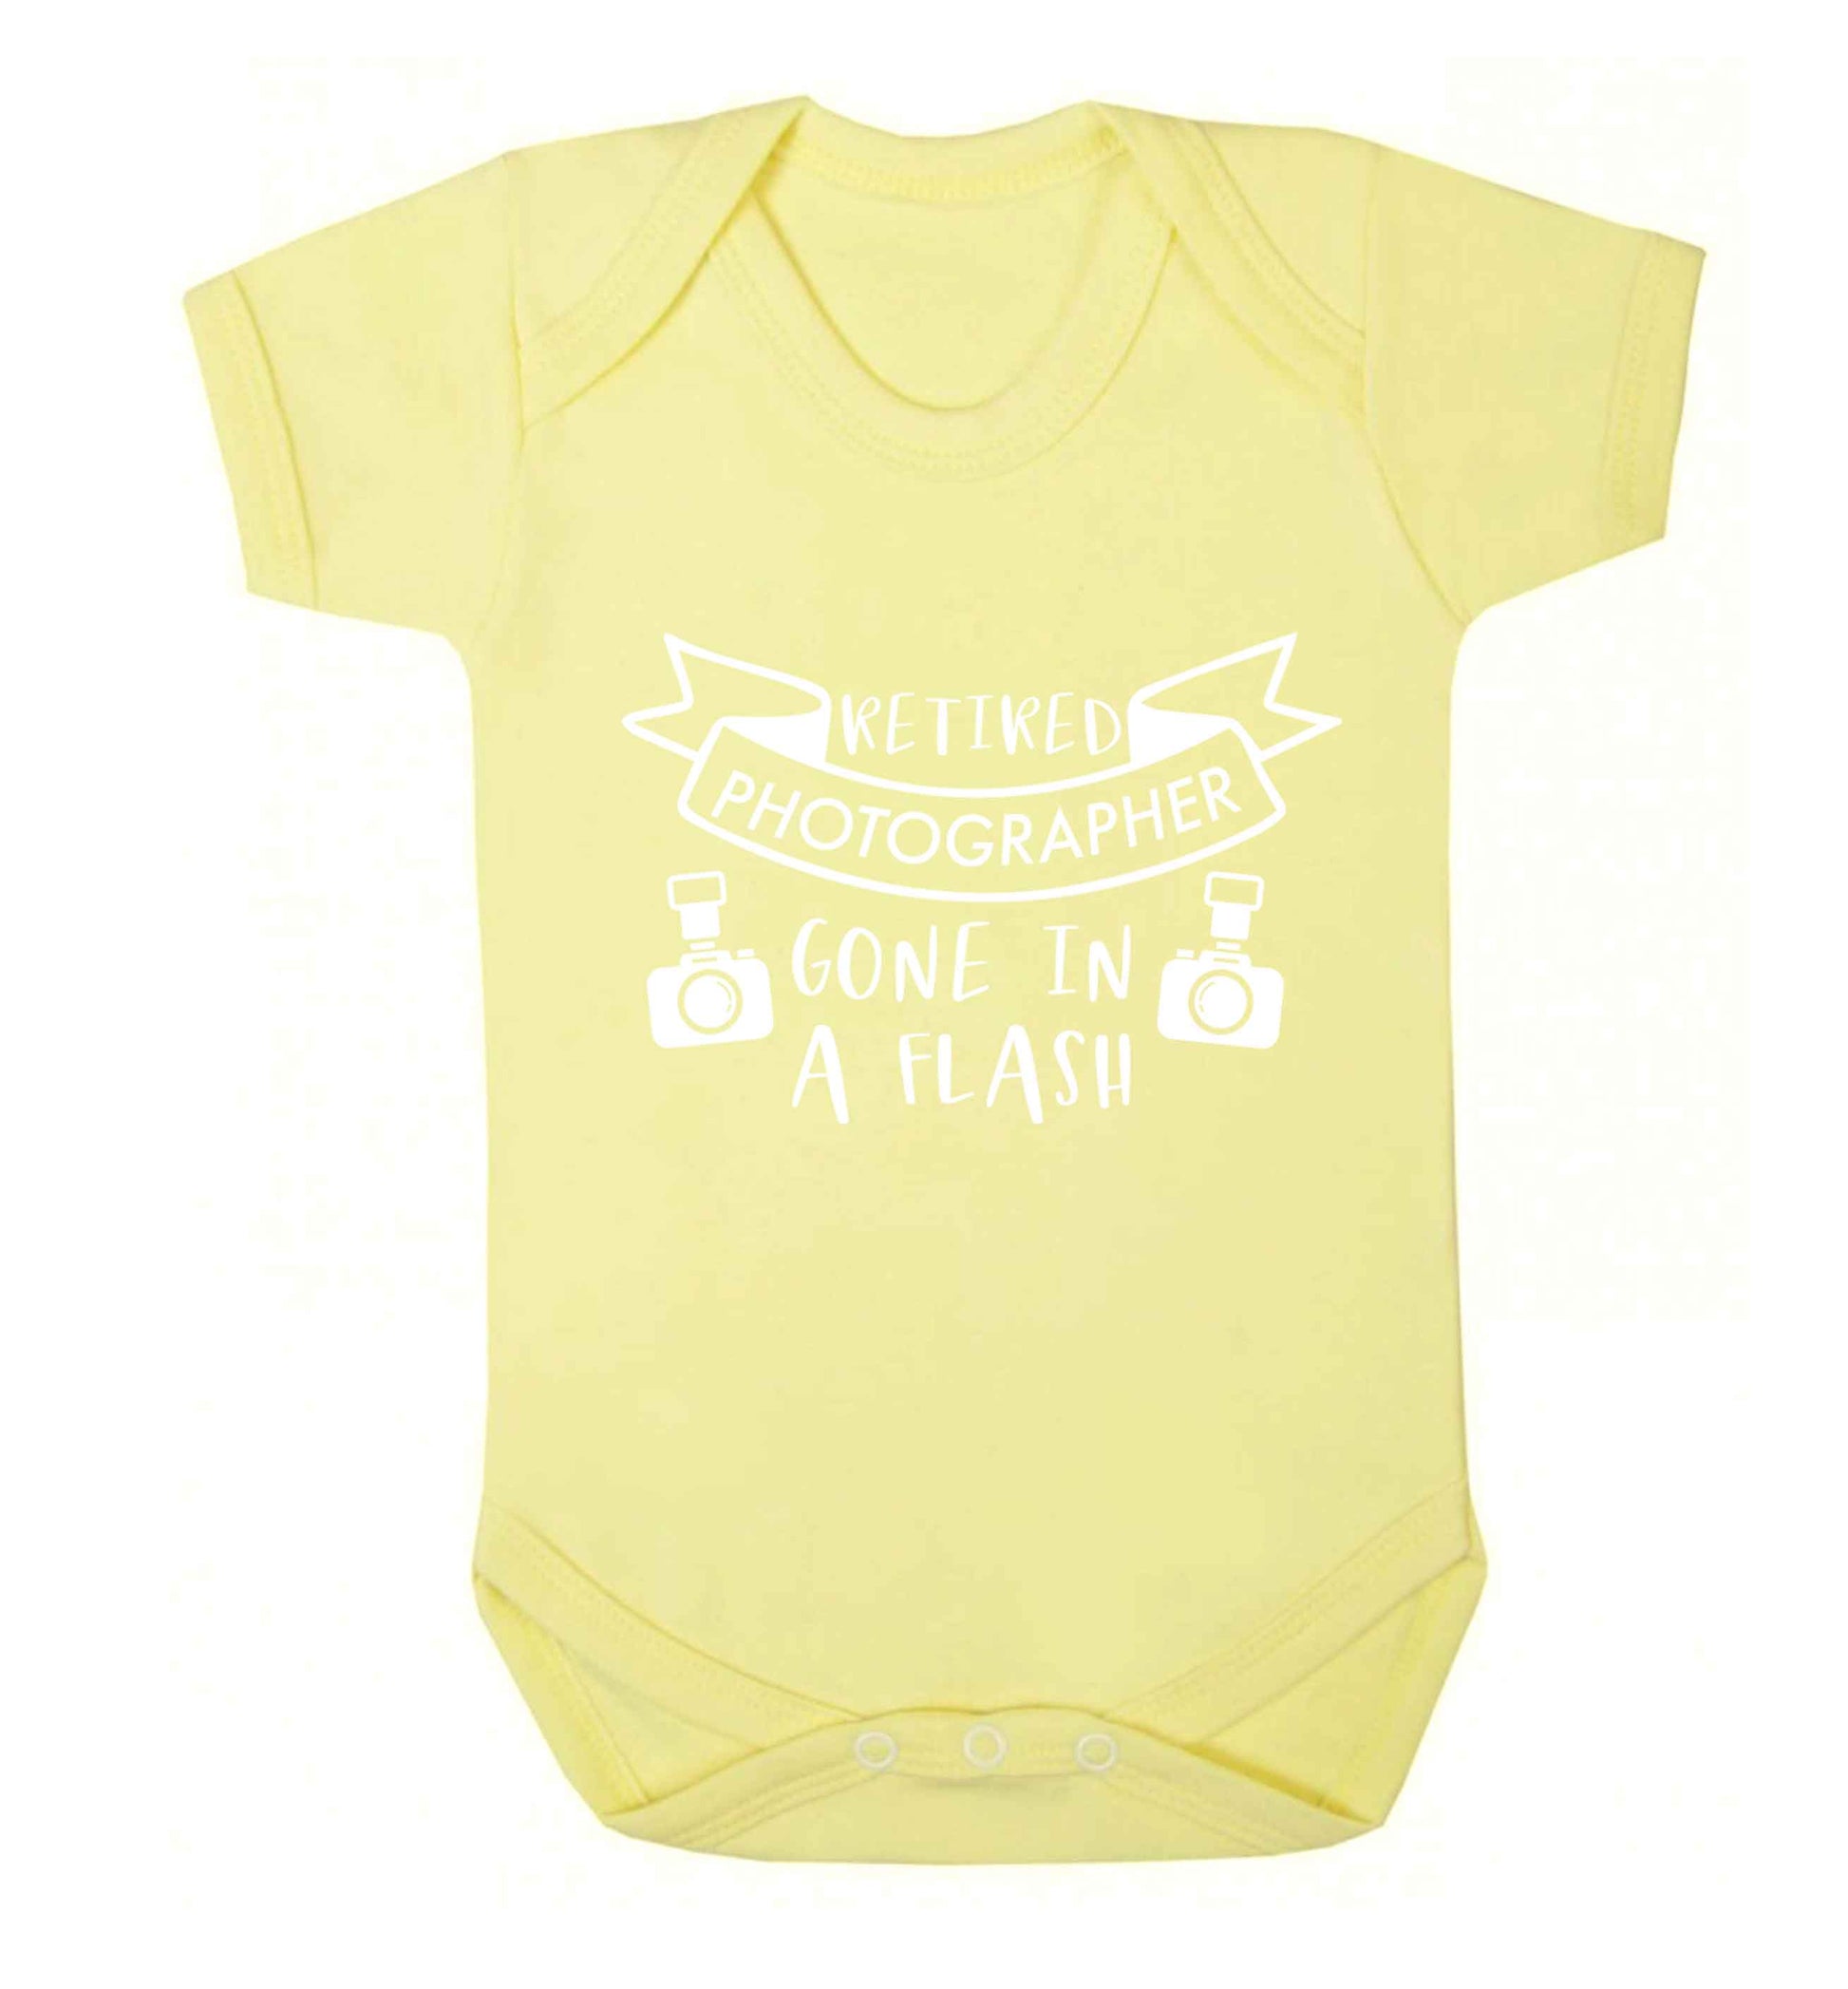 Retired photographer gone in a flash Baby Vest pale yellow 18-24 months